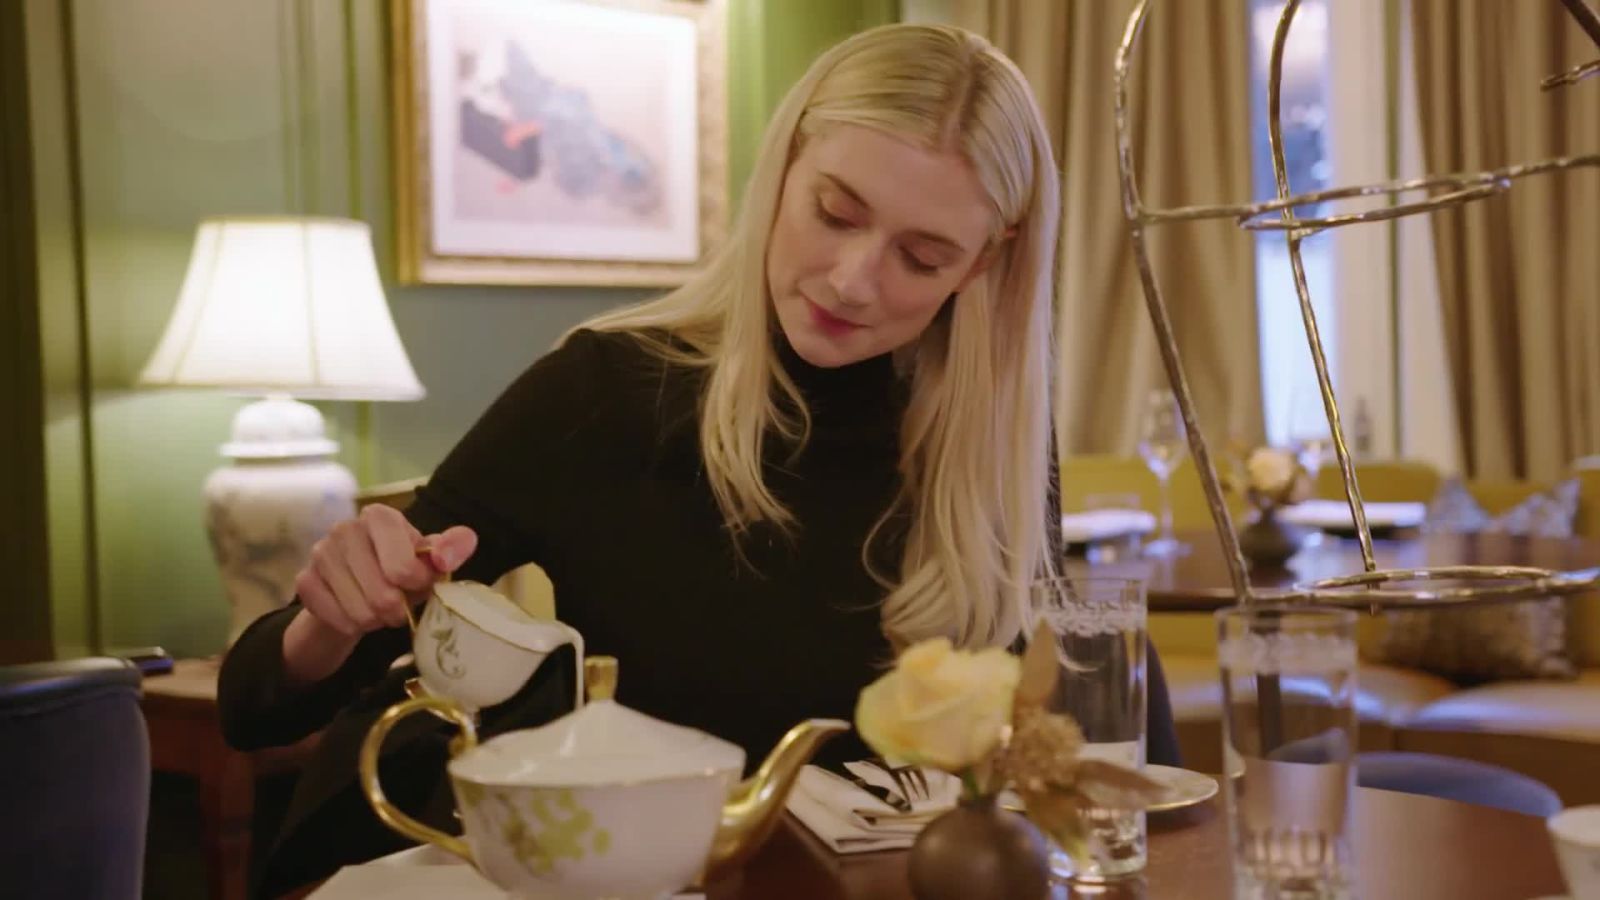 3 Hours and 22 Minutes of Scones and Red-Carpet Style with Elizabeth Debicki